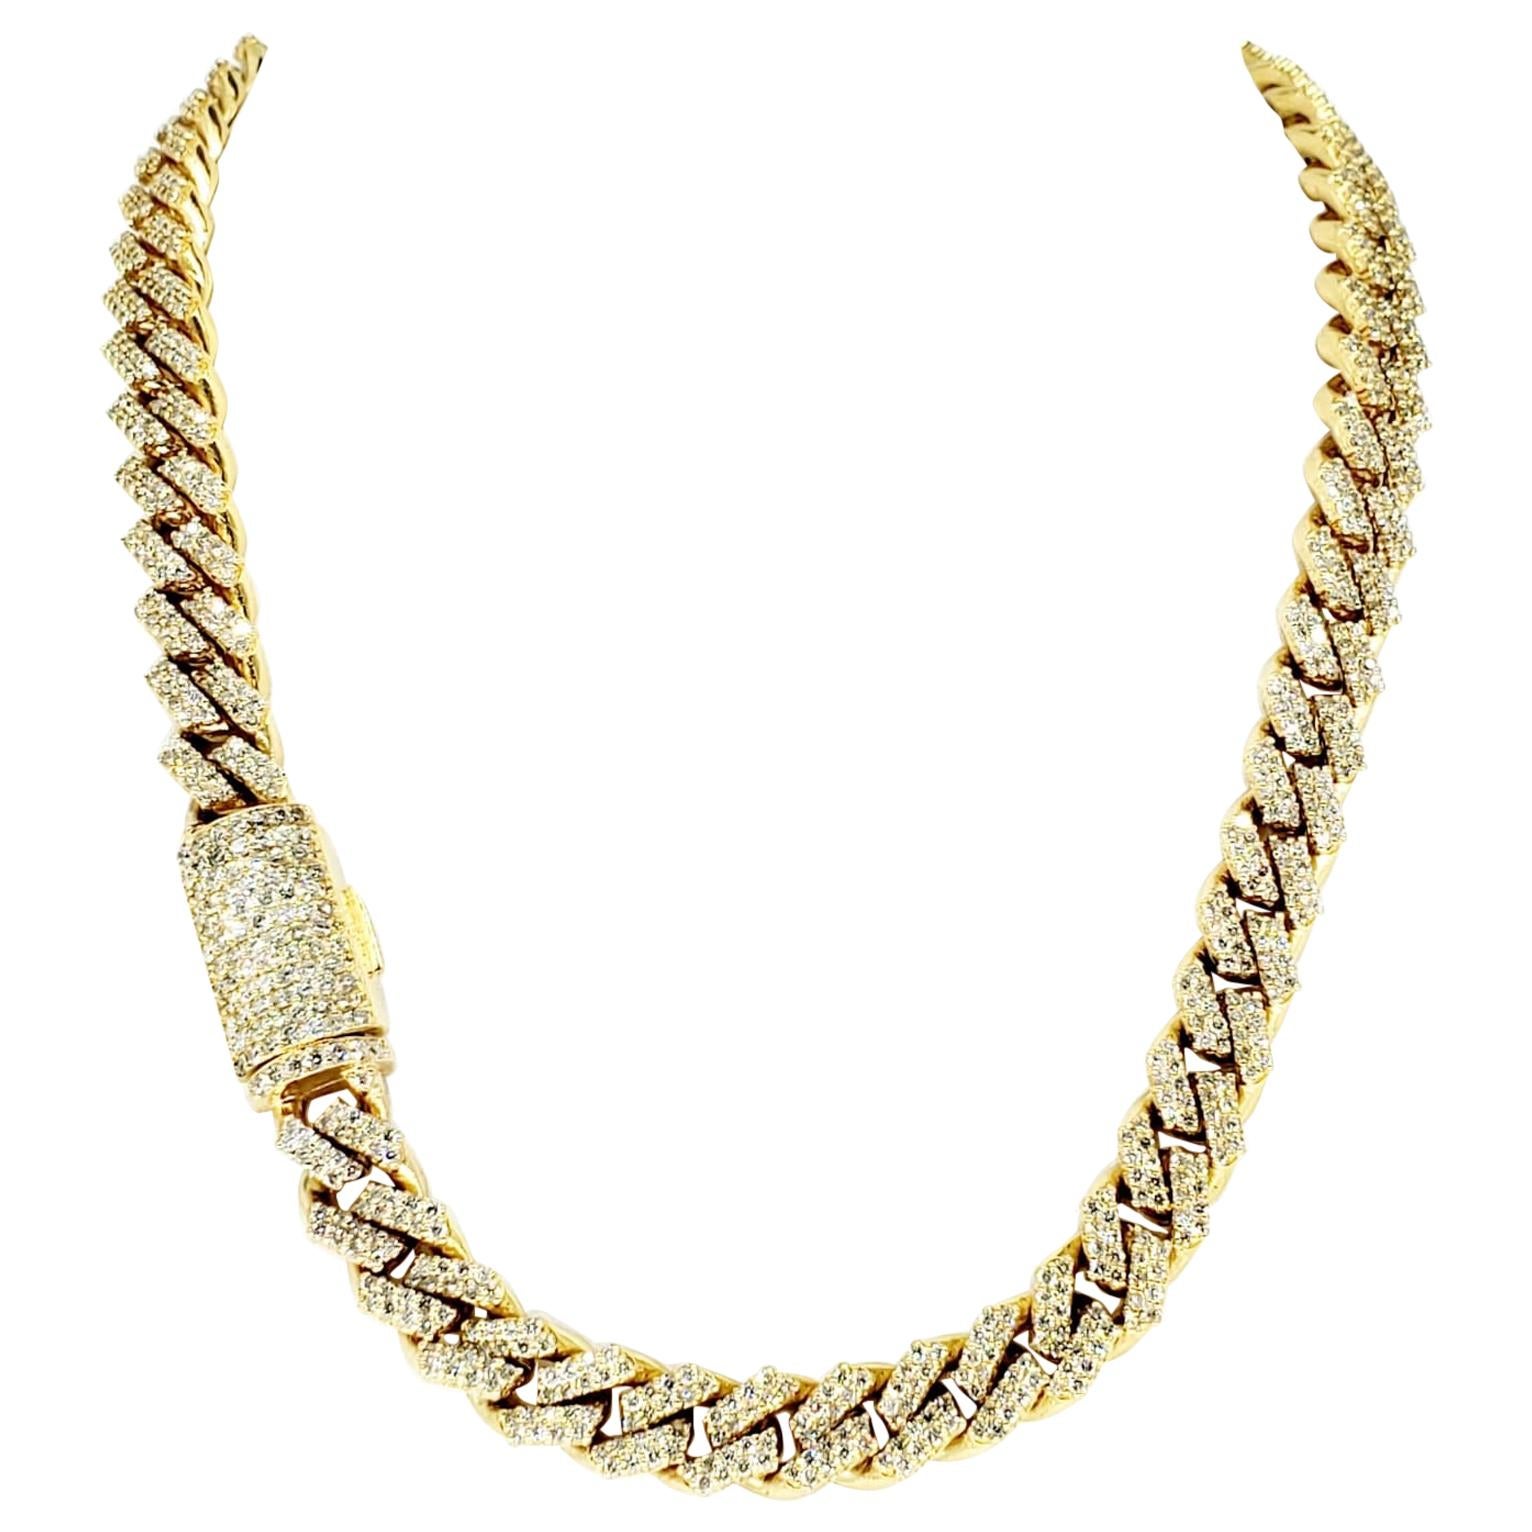 Modern 16.20 Carat Diamonds 9mm Wide Cuban Link Choker Chain. This handmade Miami Cuban link chain includes approx 1200 diamonds totaling approx weight 16.20 carat. The chain is heavy weighting a total of 113.5g and is made in 10k solid gold. The